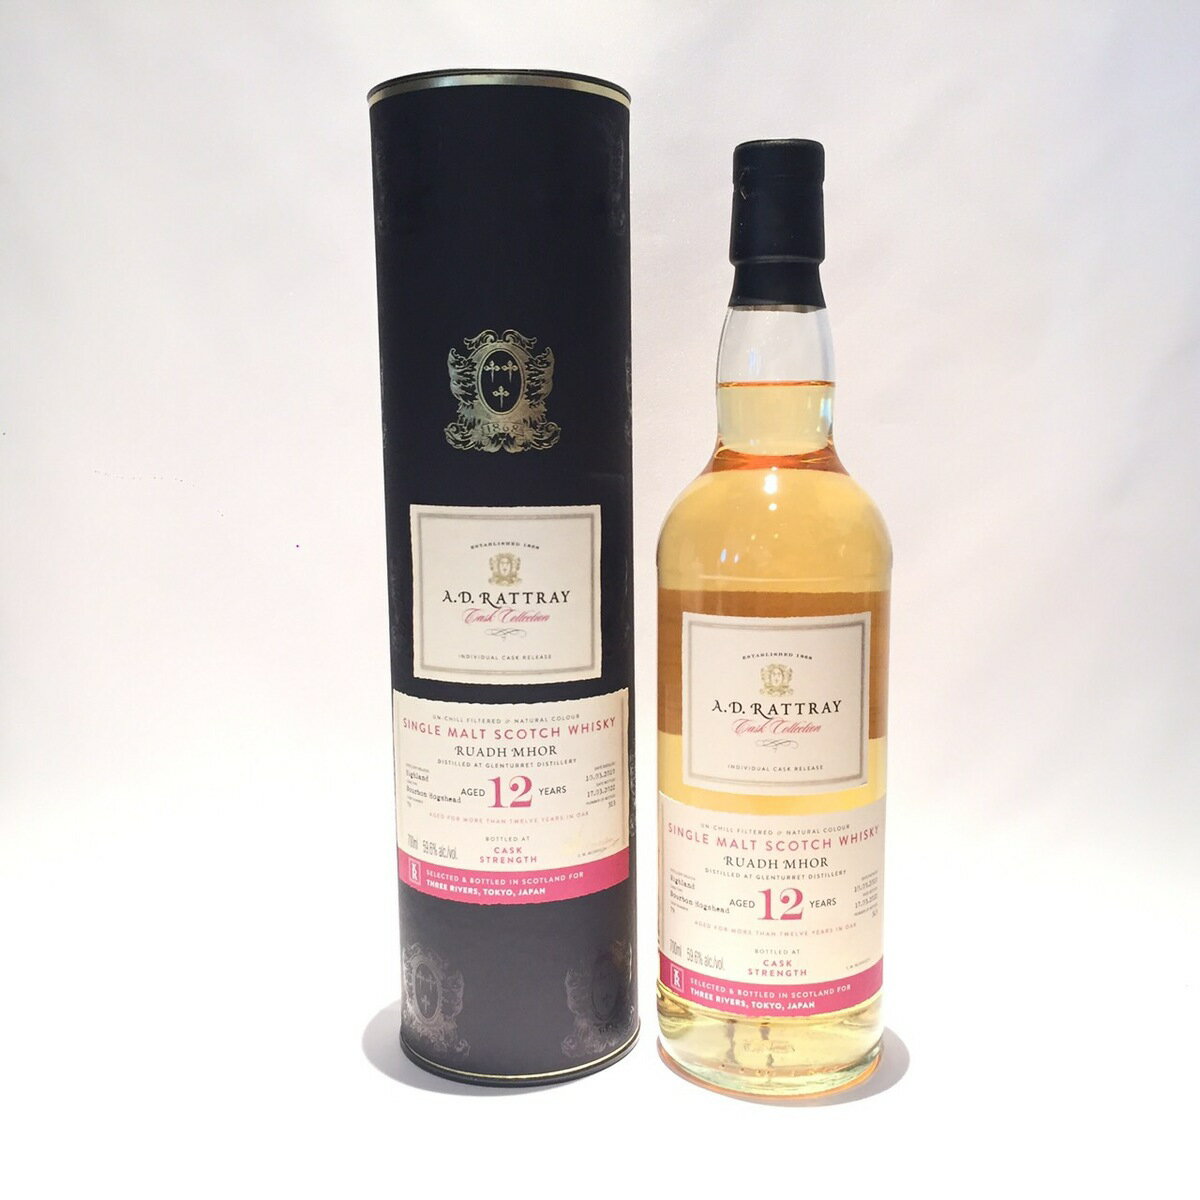 A.D ラトレールーアックモア（グレンタレット）12年2010 - 2022 A.D RATTRAYRUADH MHOR（Glenturret）AGED 12 YEARS2010 - 2022 59.6％alc./vol. / 700ml